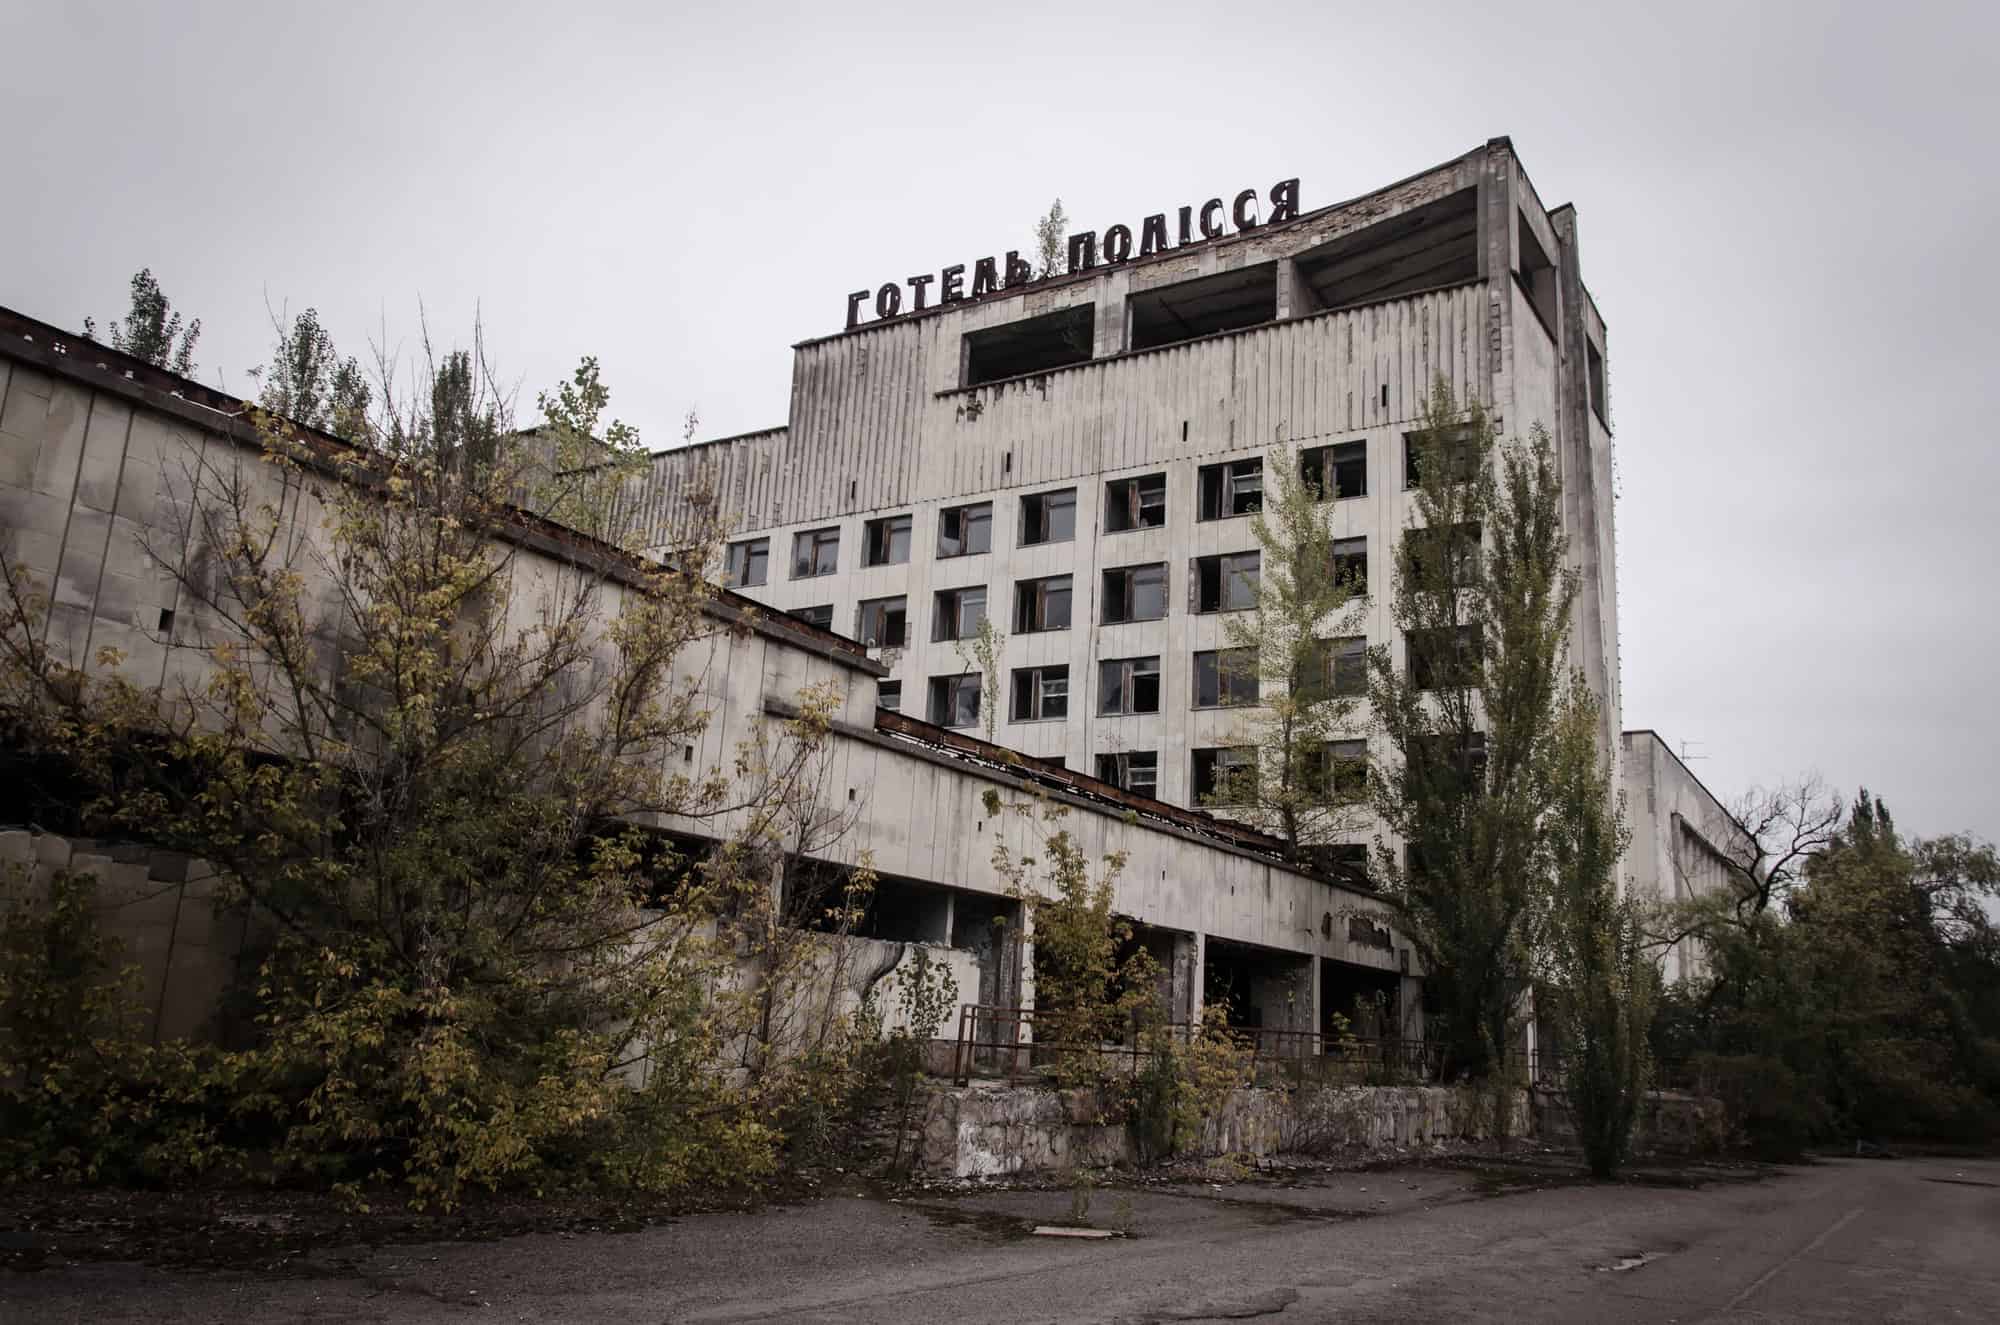 <p>The Chernobyl Exclusion Zone in Ukraine serves as a stark reminder of the 1986 nuclear disaster, one of the most catastrophic in history. This vast, largely uninhabited area is a chilling snapshot of human departure and nature’s reclamation, where silent towns and a decayed power plant are eerily preserved. </p> <p>While visitors can explore certain parts on guided tours, access to the most contaminated areas, known as “red zones” like the vicinity of the destroyed reactor and the Red Forest, remains strictly off-limits due to high radiation levels. These restrictions ensure visitor safety, highlighting the grave consequences of nuclear accidents and the lingering dangers they pose.</p>